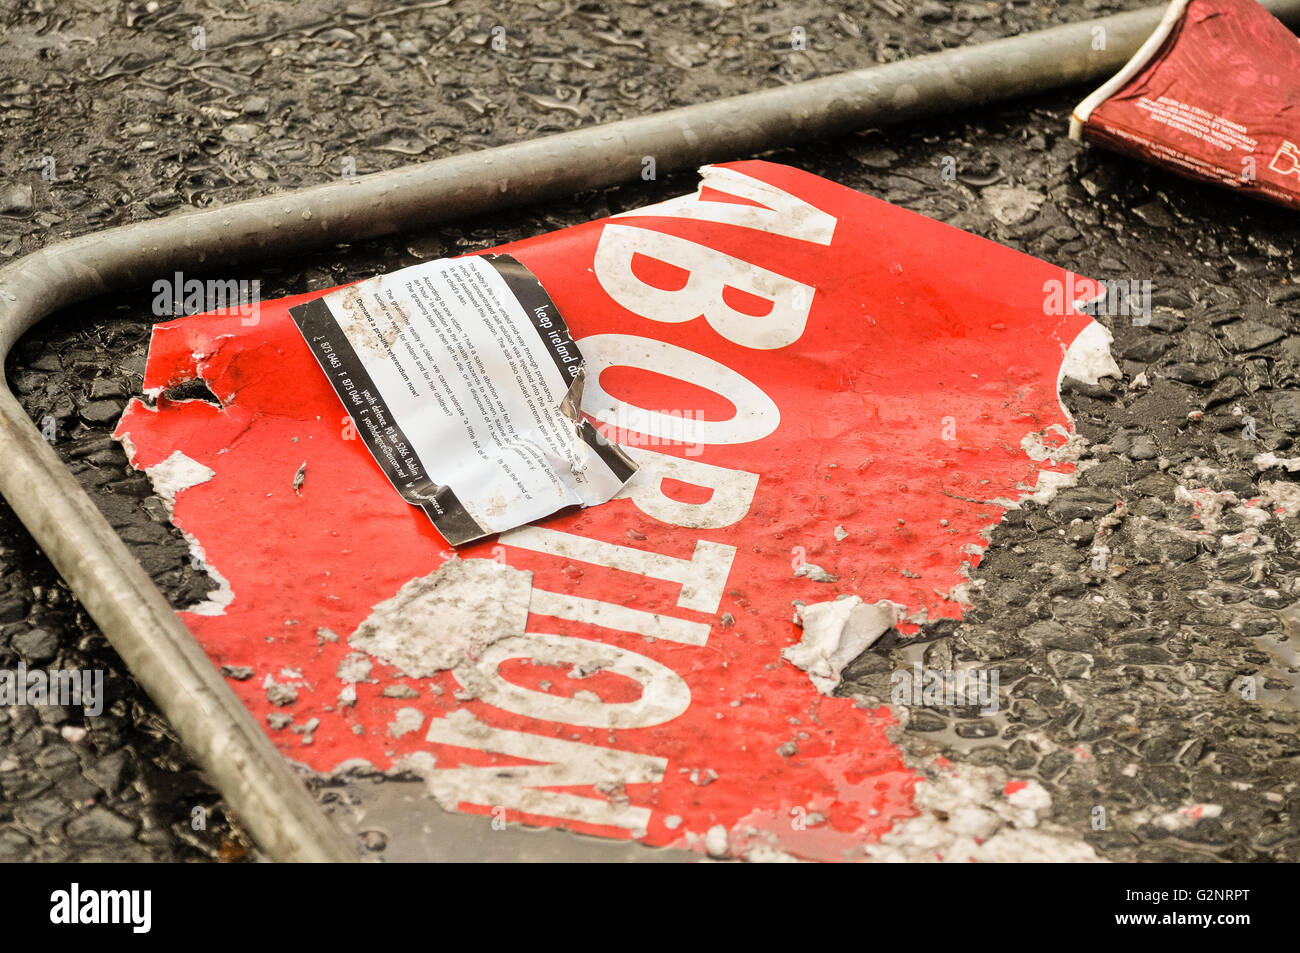 18/10/2012, Belfast - An anti-abortion banner lies on the ground following a protest. Stock Photo